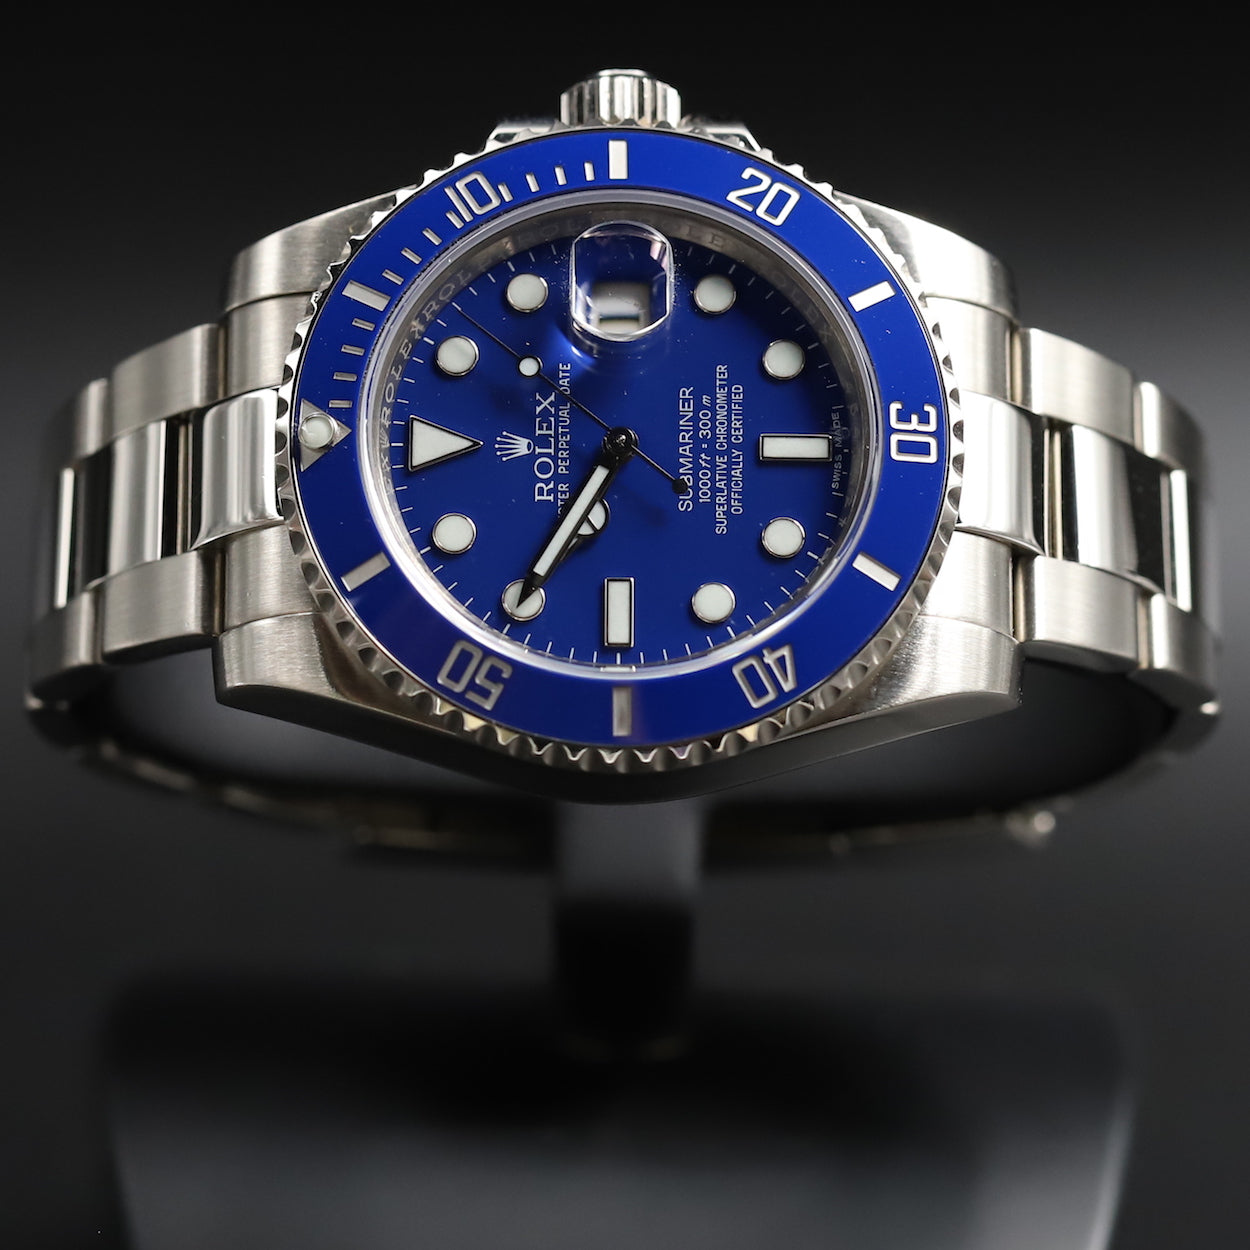 Rolex Submariner White Gold Smurf Blue Dial Ceramic Bezel Mens... for  $34,130 for sale from a Trusted Seller on Chrono24